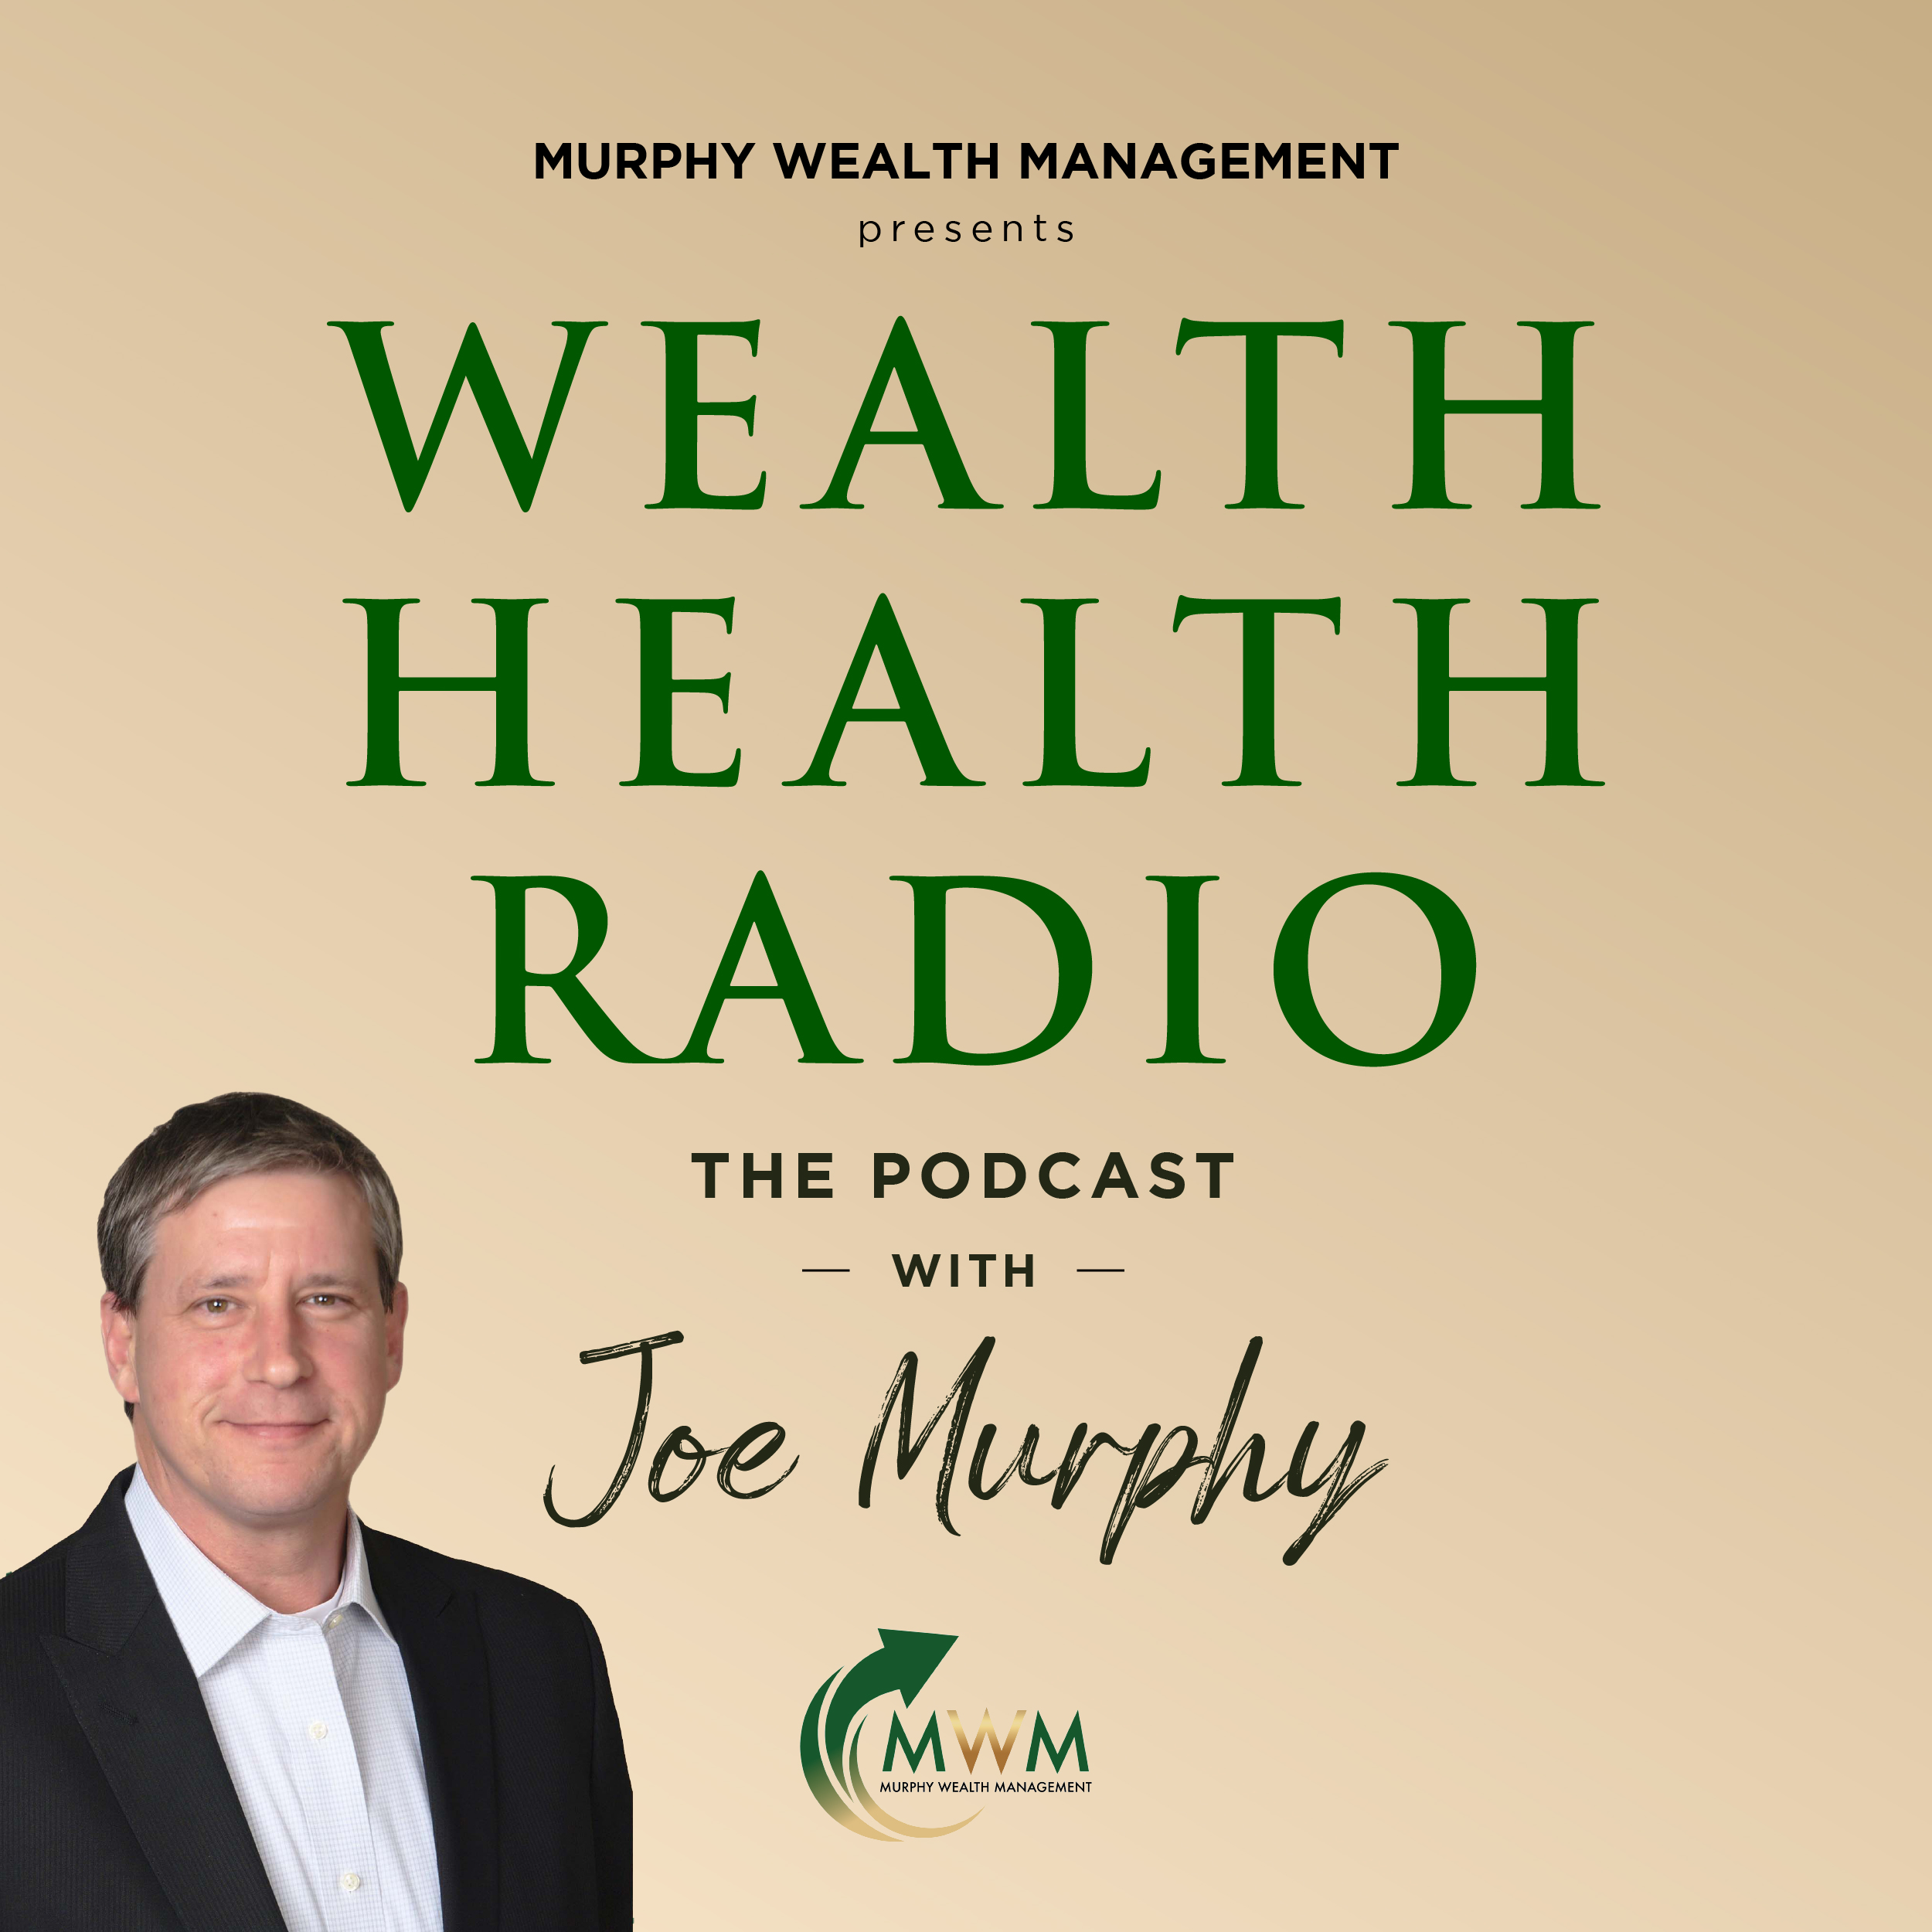 Wealth Health Radio A new report graded the retirement systems of countries across the world and America earned a C+...Joe Murphy shows how you can build an A+ retirement plan.